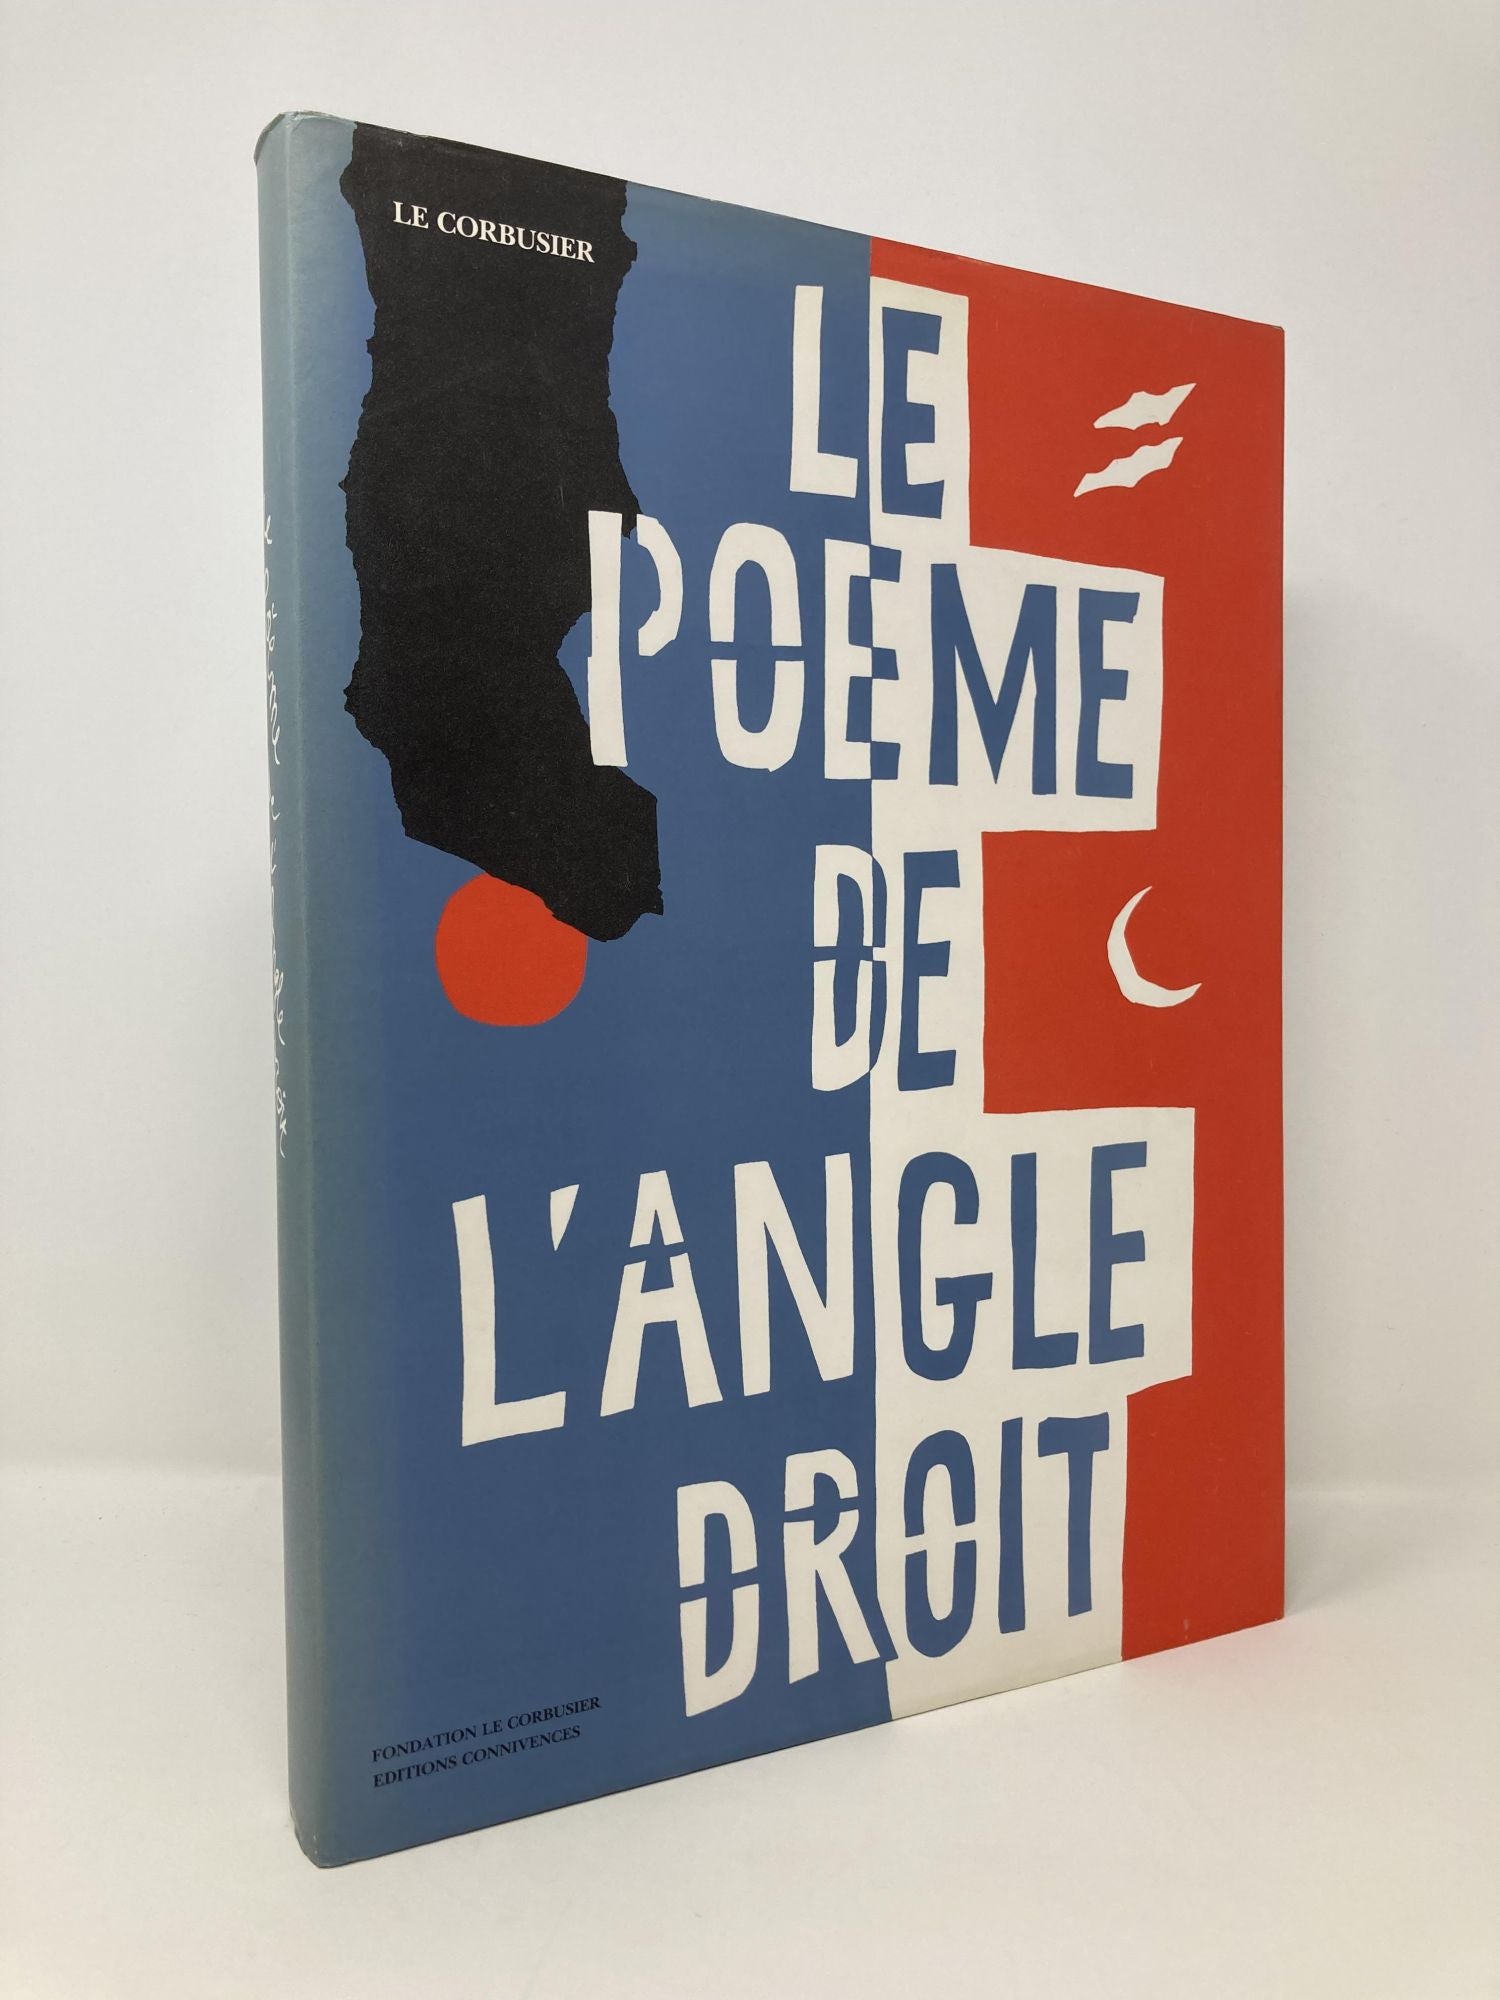 Le Poeme de l'Angle Droit / Poem of the Right Angle French Edition by Le  Corbusier on Sag Harbor Books